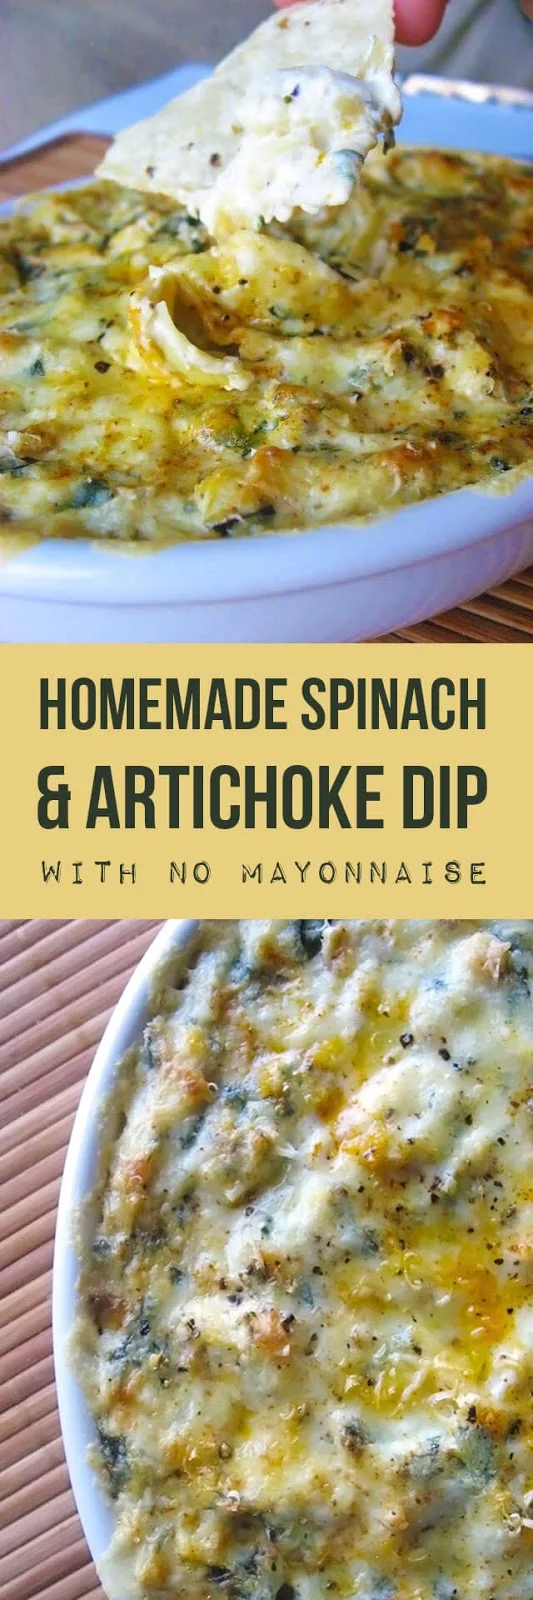 Spinach and Artichoke Dip Without Mayo | The Rising Spoon